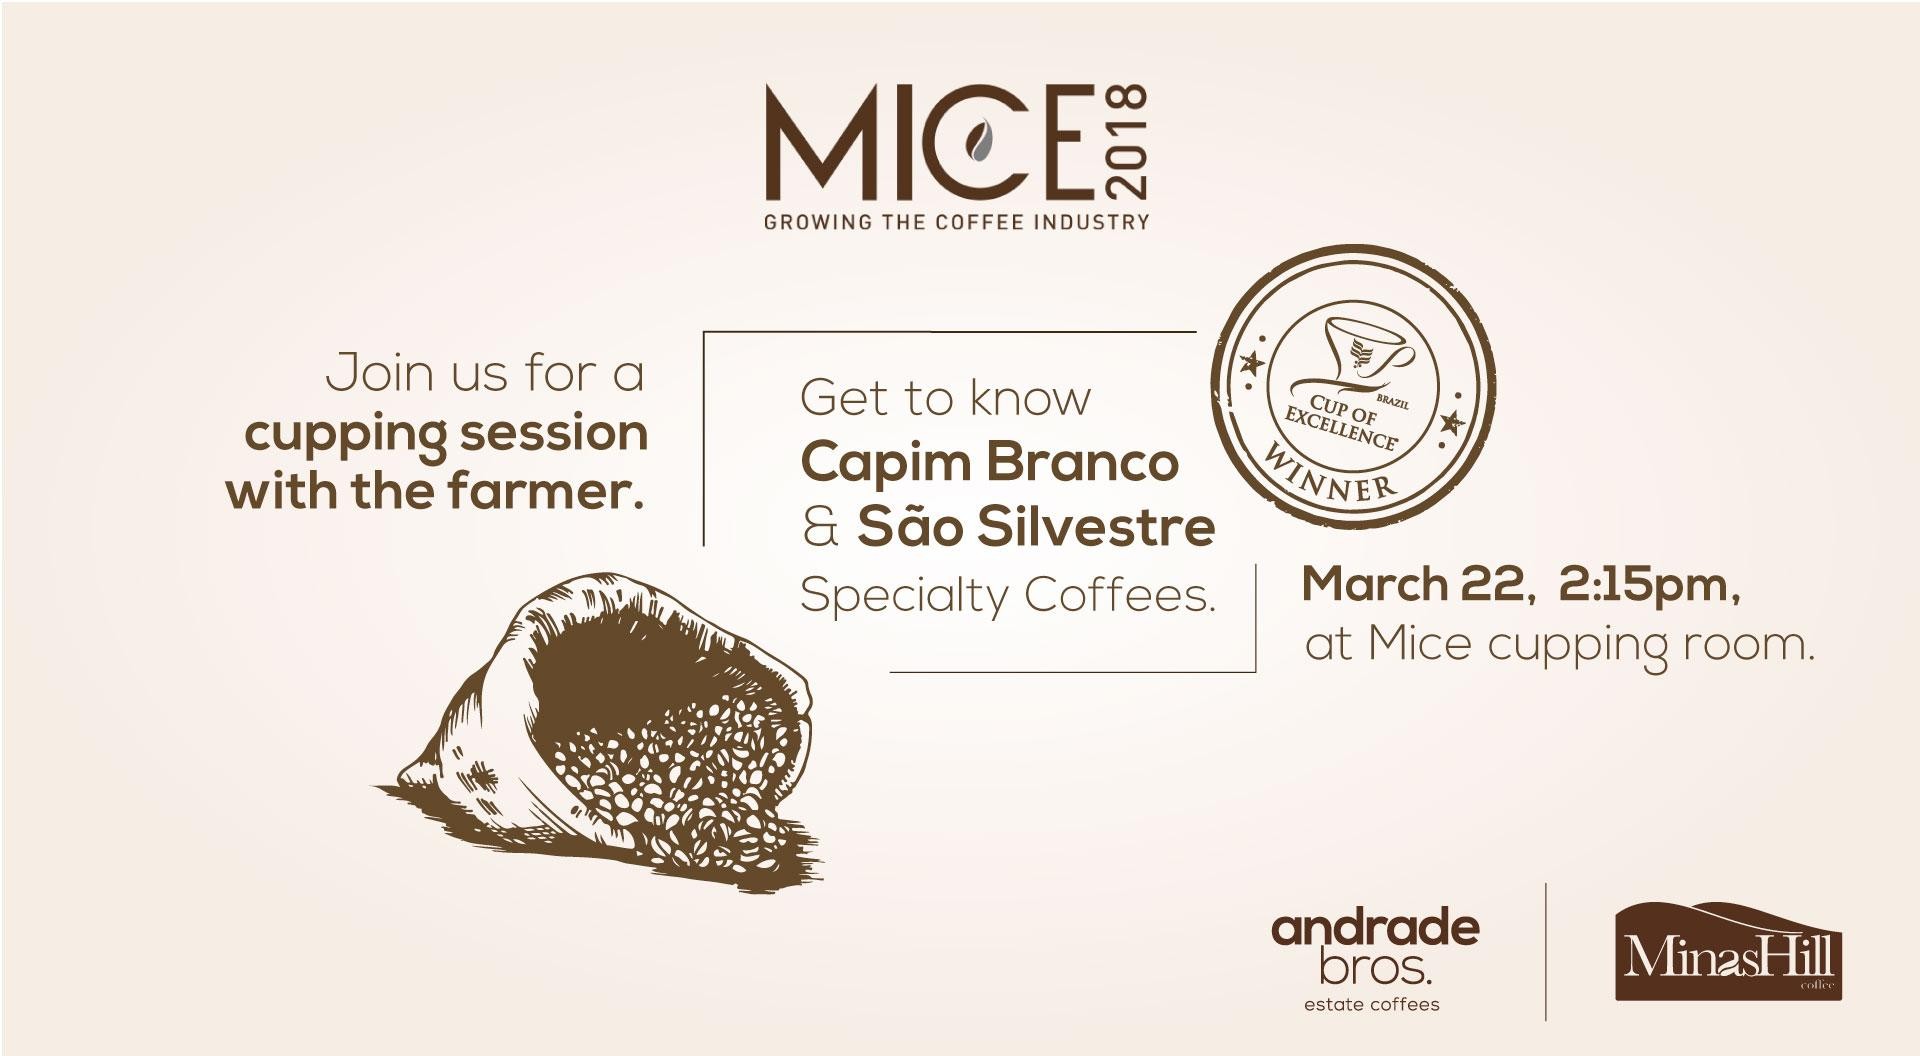 MICE 2018, see you there.